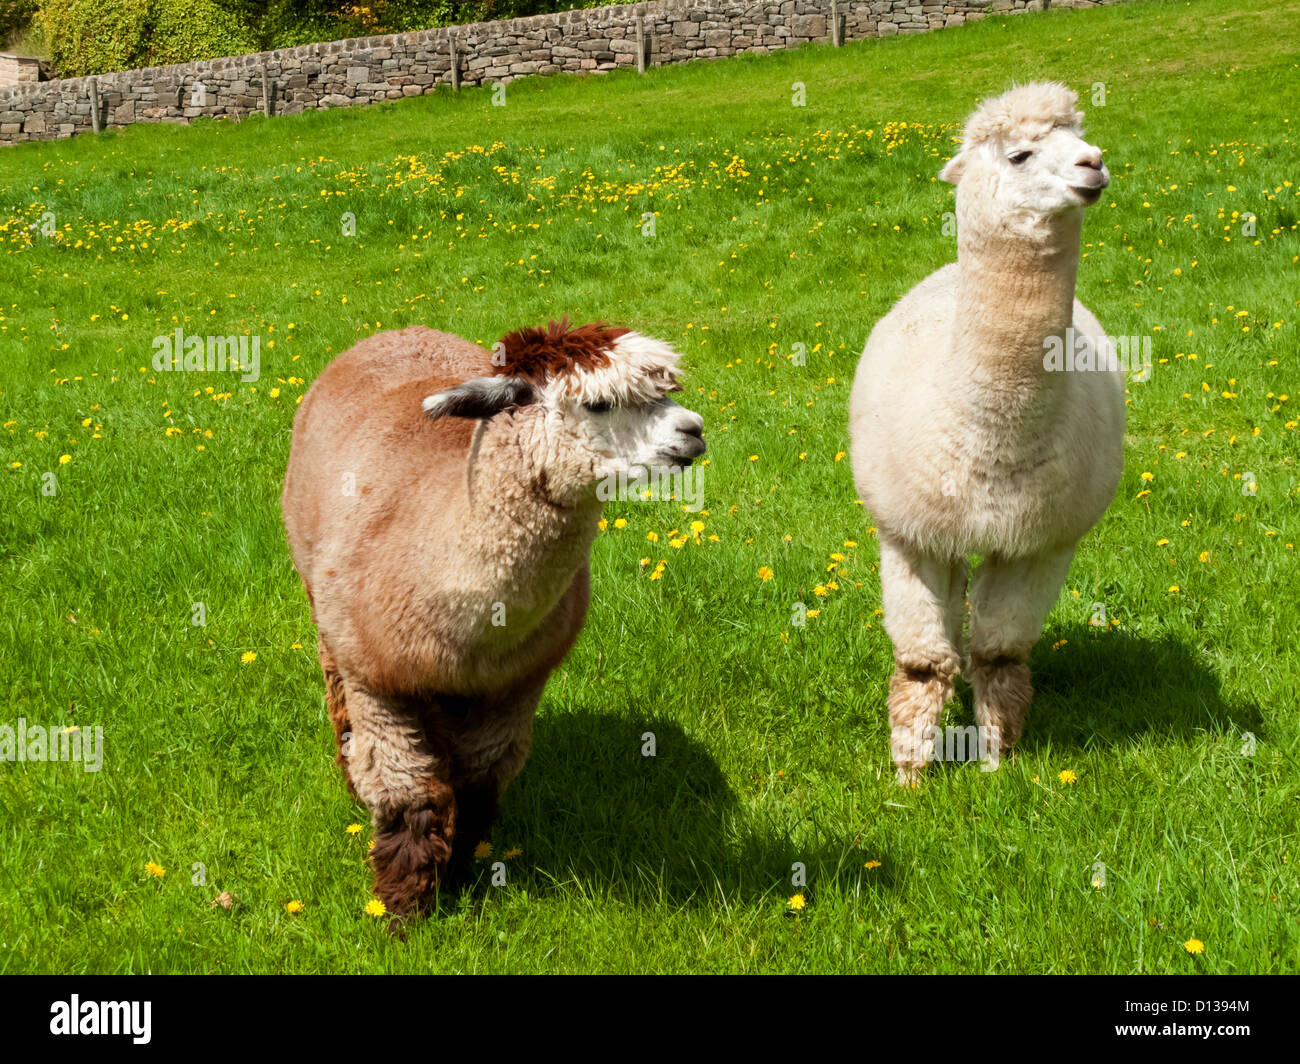 Pair of Alpacas Vicugna pacos a domesticated species of South American camelid grazing in a field of grass Stock Photo